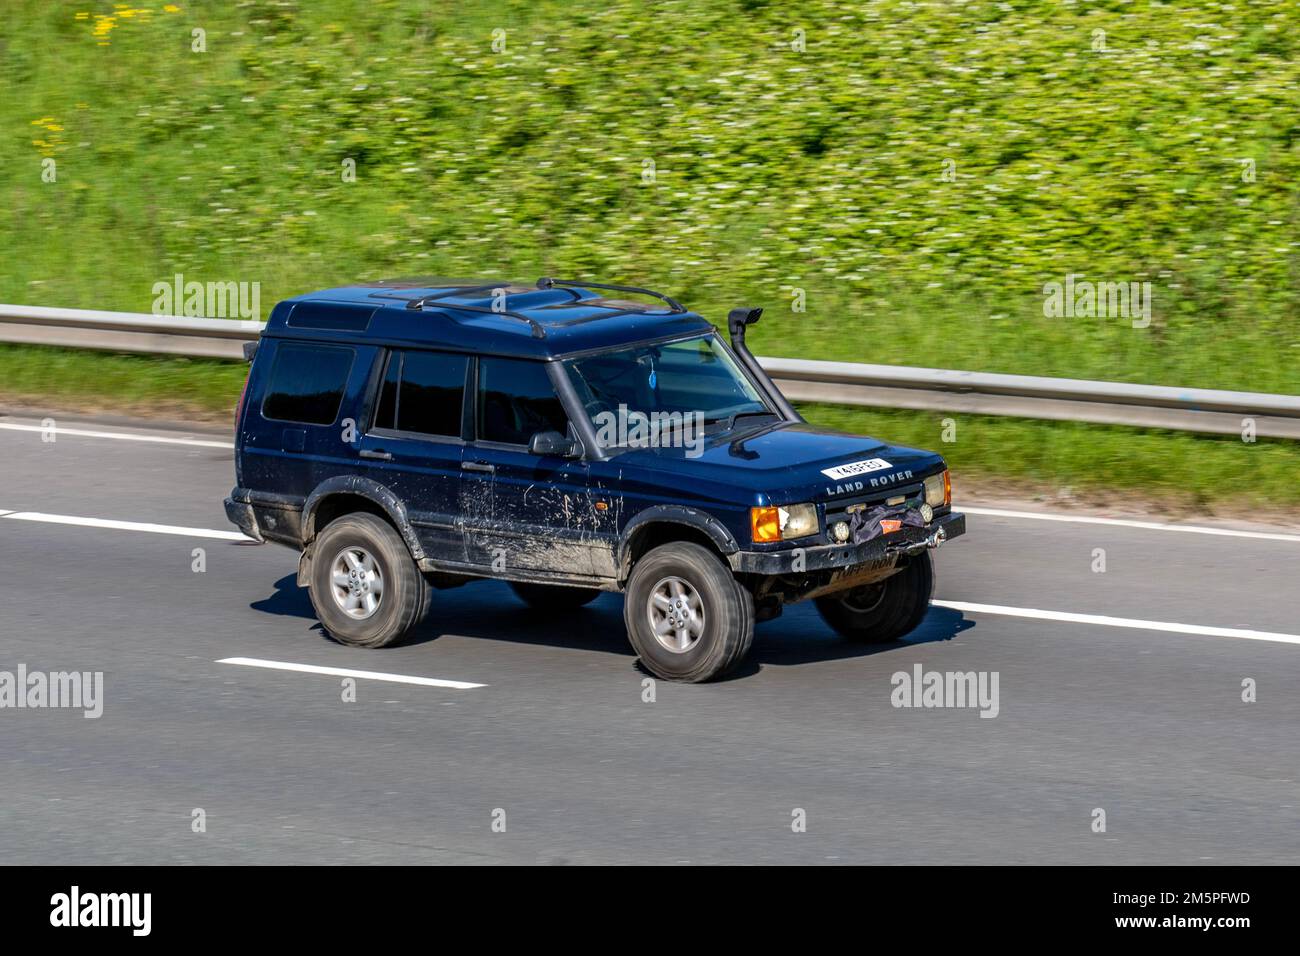 2001 Black LAND ROVER DISCOVERY Muddy 2495cc Diesel 4x4 off-road SUV vehicle with snorkel exhaust; travelling on the M6 Motorway UK Stock Photo